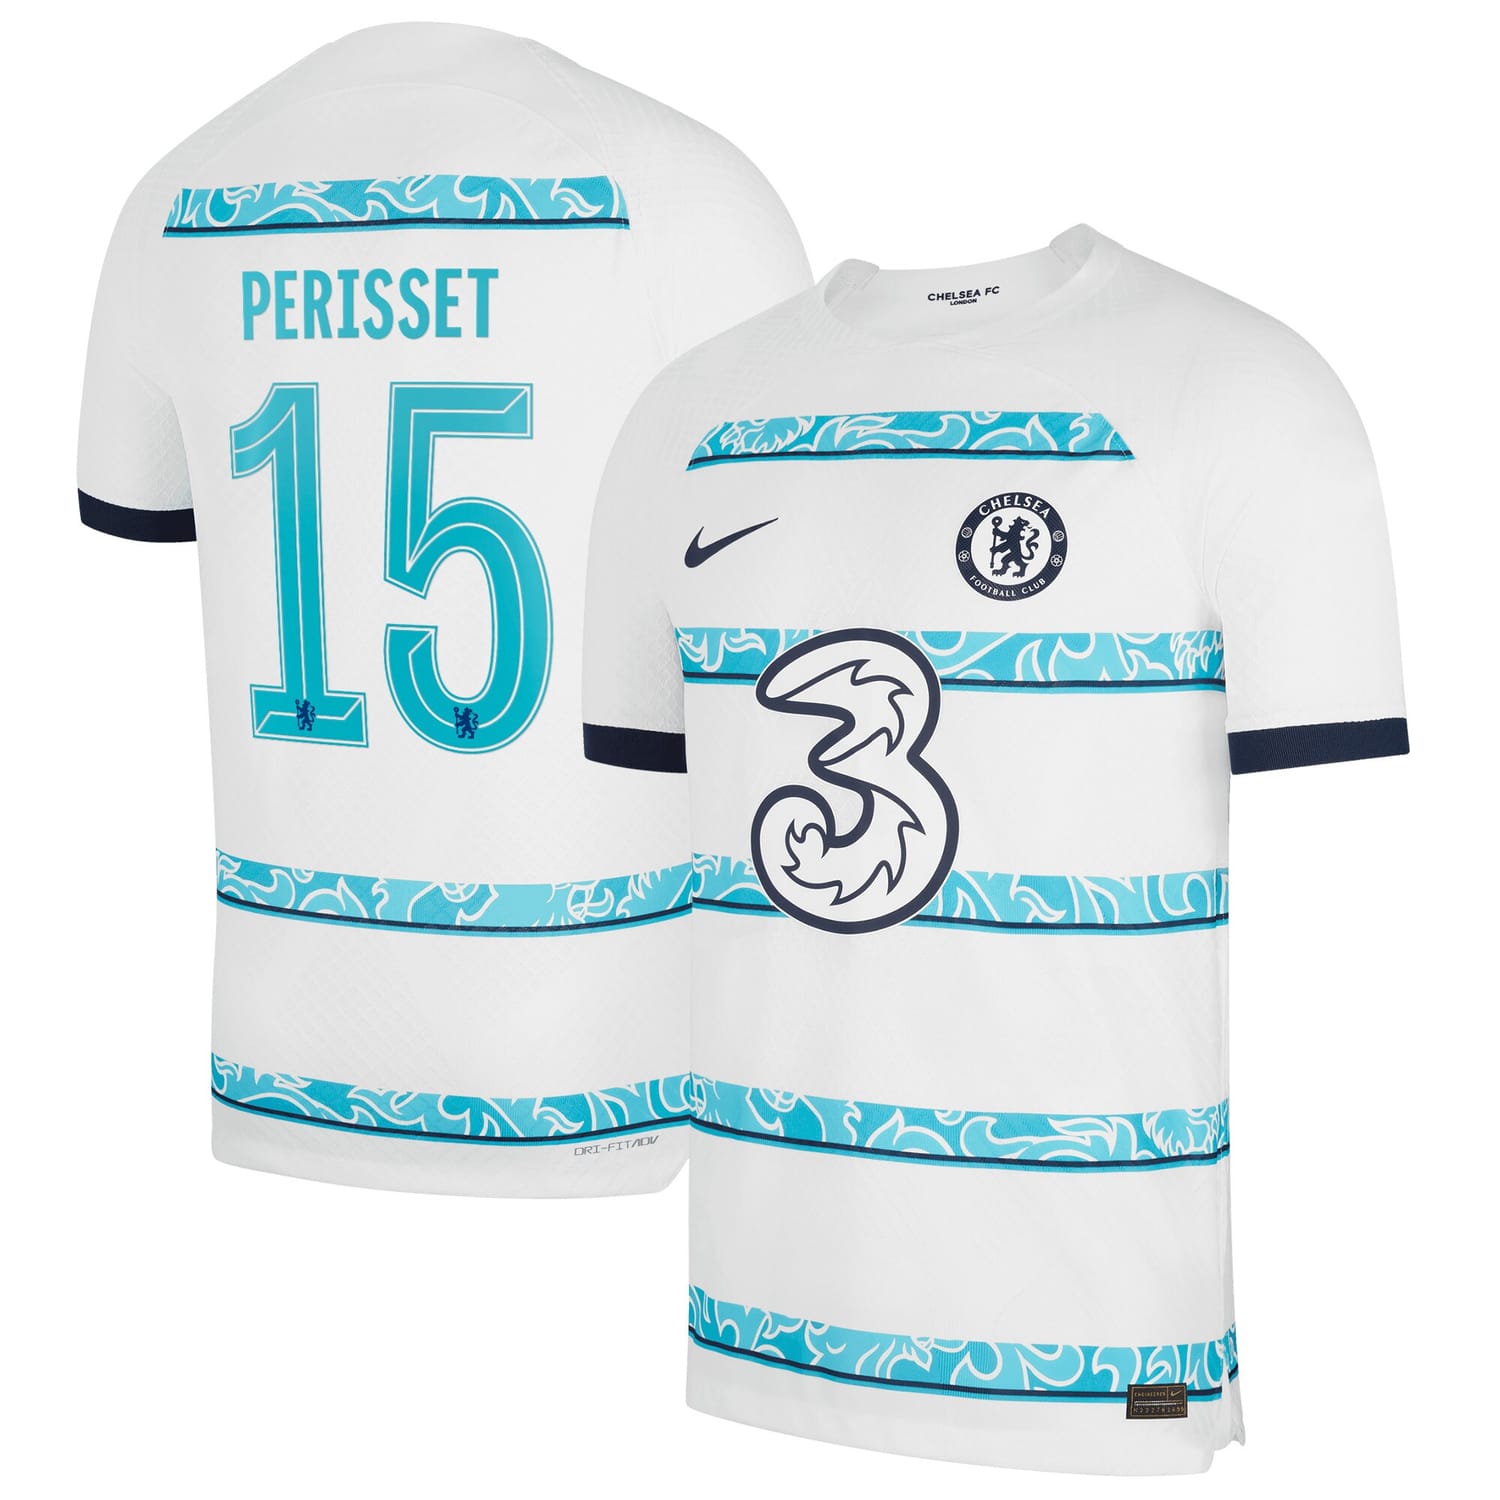 Premier League Chelsea Away Cup Authentic Jersey Shirt 2022-23 player Eve Perisset 15 printing for Men